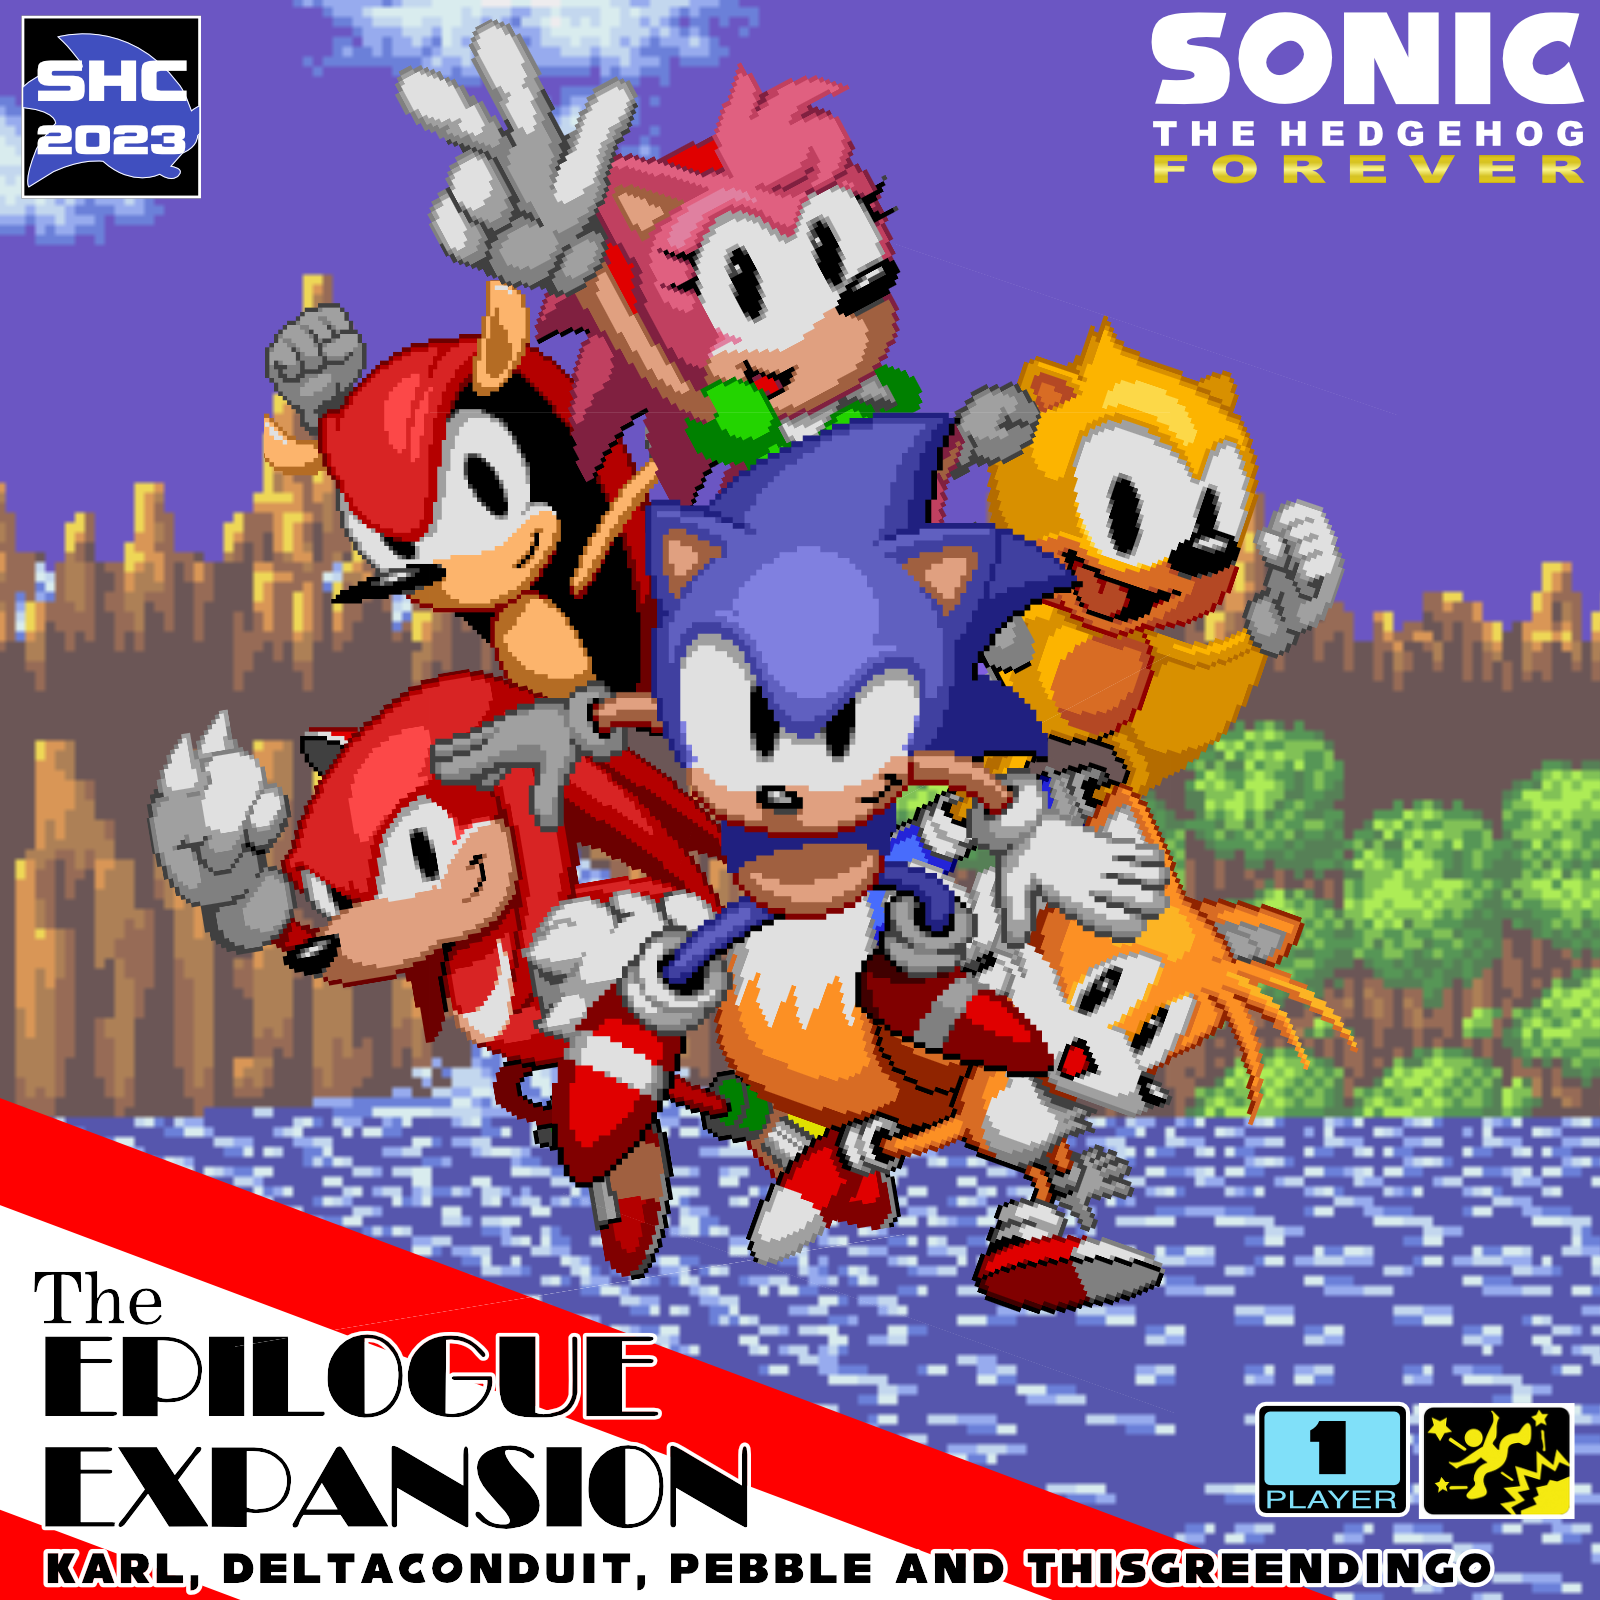 Mania Green Hill - Sonic Forever [Sonic the Hedgehog Forever] [Mods]